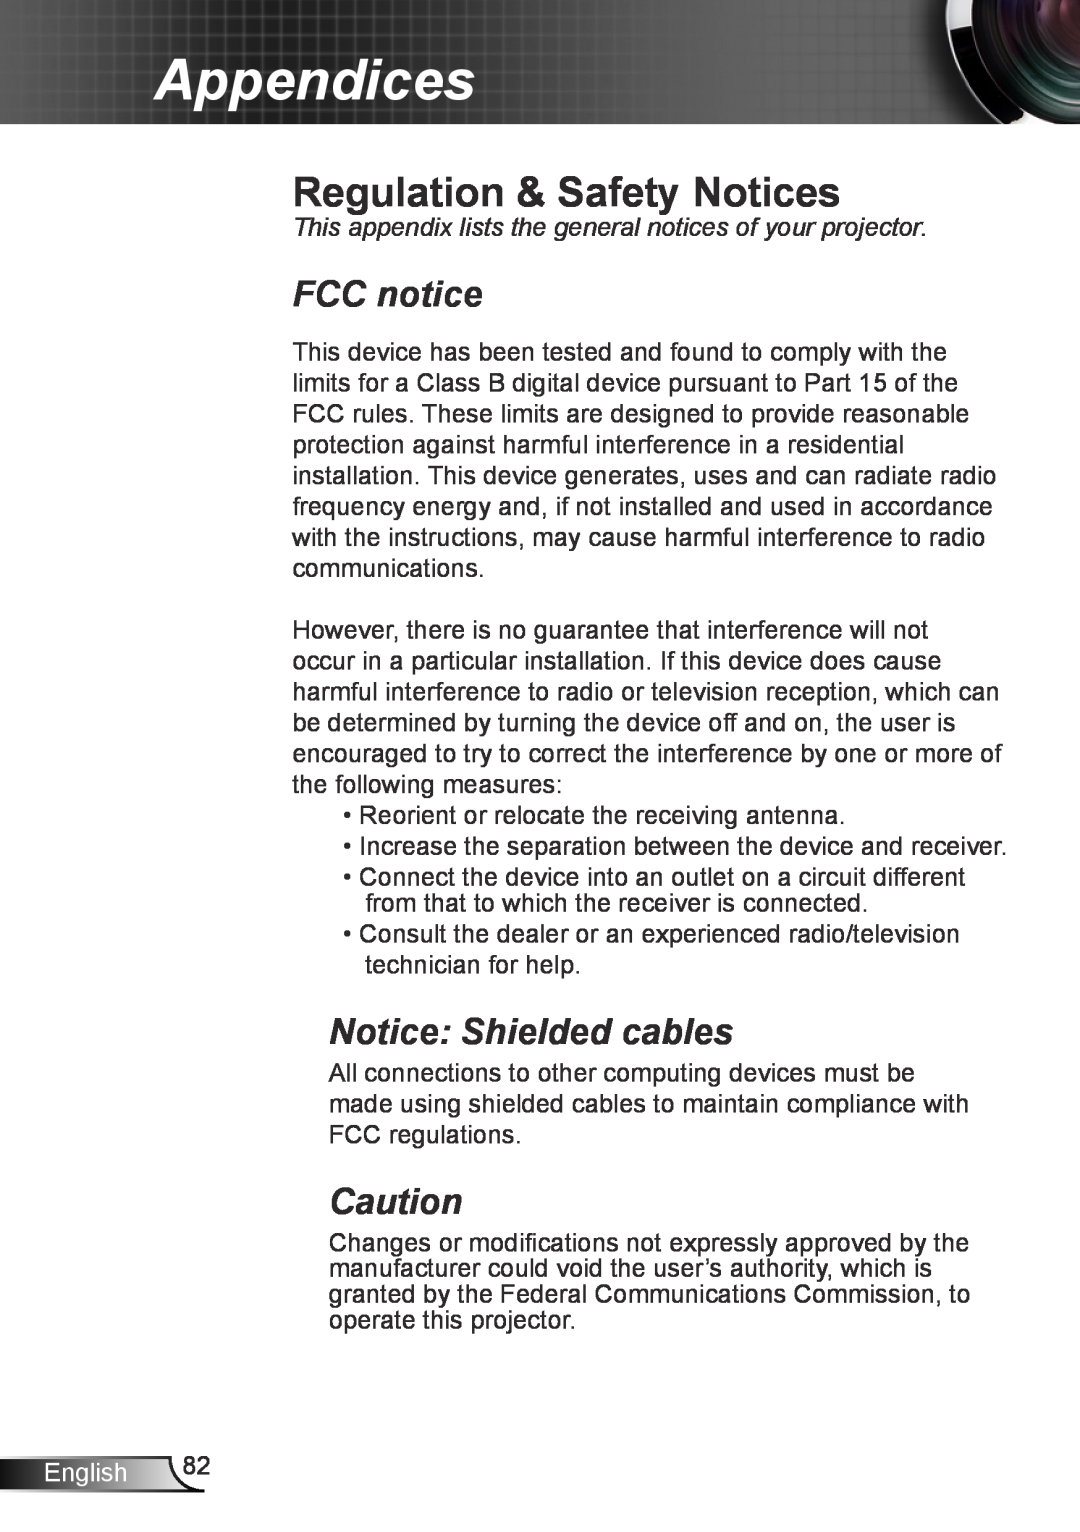 Optoma Technology TW6353D, TX6353D Regulation & Safety Notices, FCC notice, Notice Shielded cables, Appendices, English 